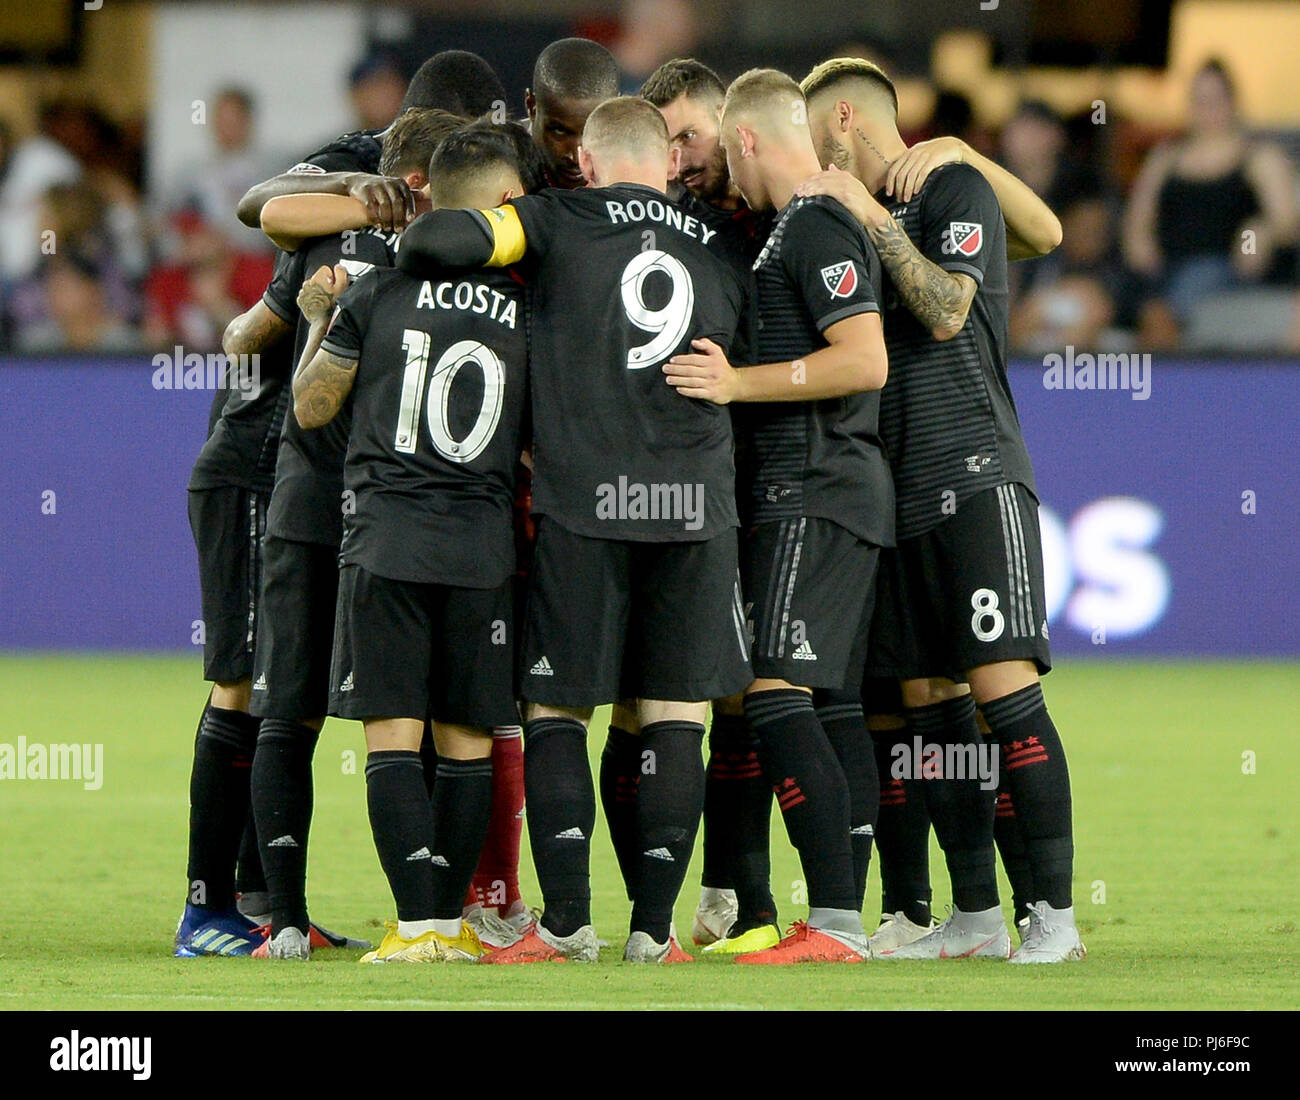 September 2, 2018 - Washington, DC, USA - 20180902 - D.C. United captain and forward WAYNE ROONEY (9) huddles with United's starting players before the start of the MLS match against Atlanta United FC at Audi Field in Washington. (Credit Image: © Chuck Myers/ZUMA Wire) Stock Photo